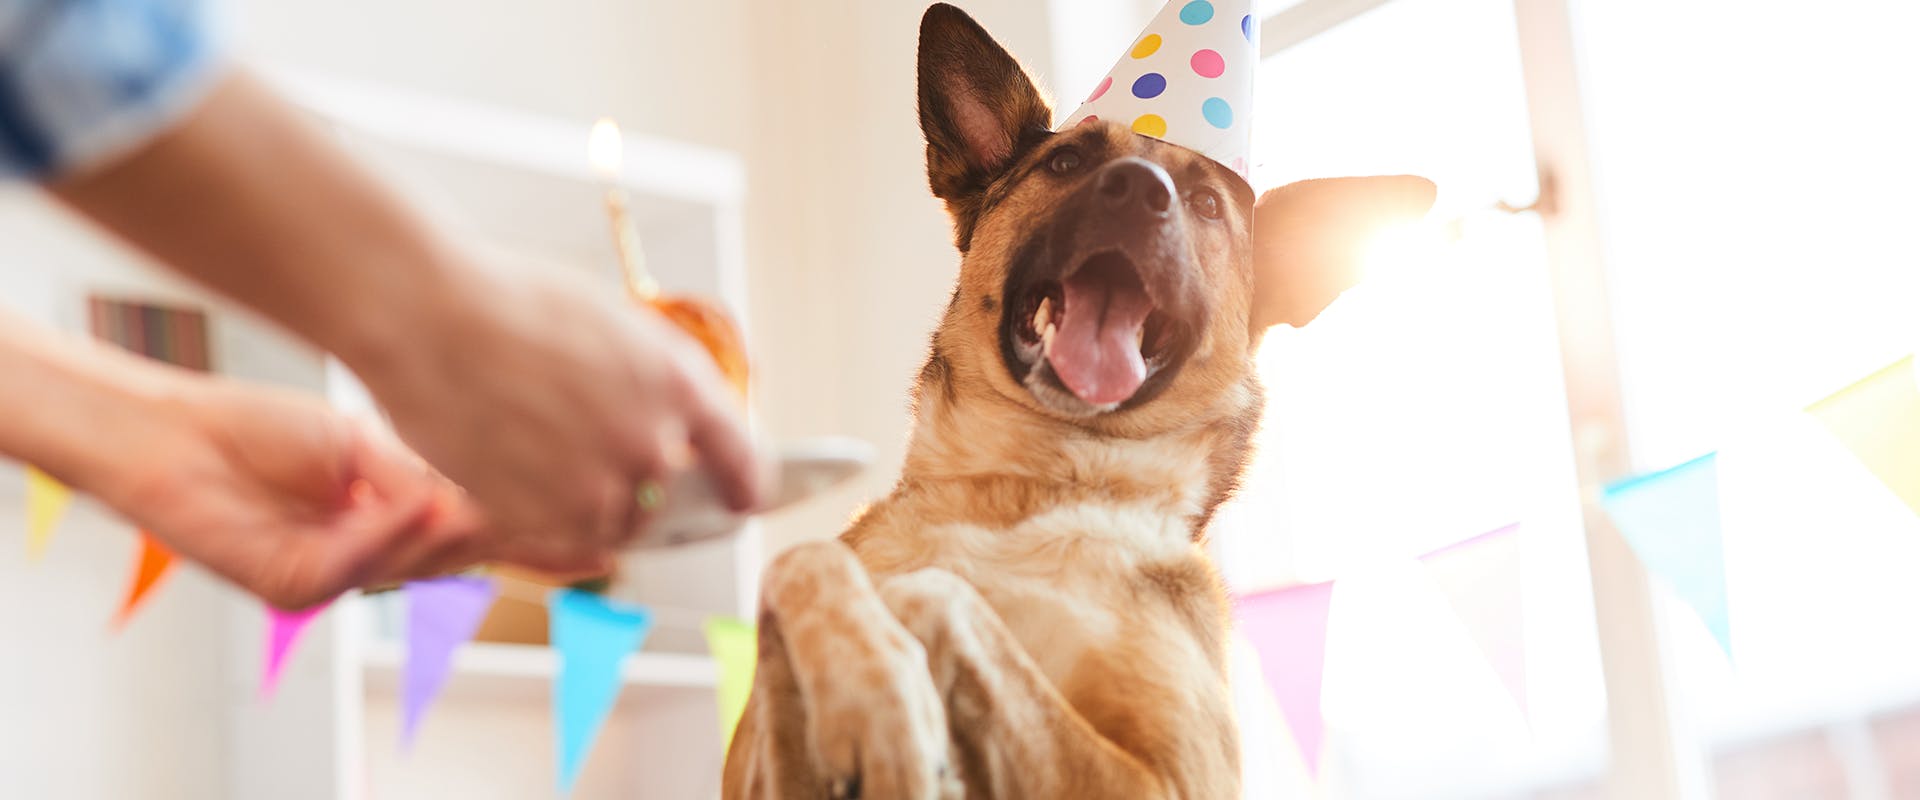 A happy German Shepherd wearing a party hat and looking excitedly at a cake with a candle in it